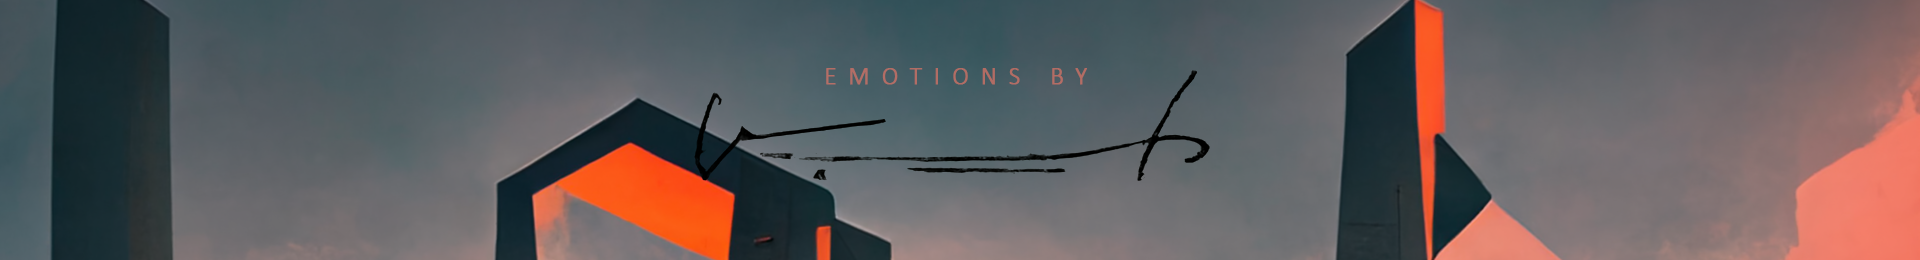 Emotions by TVDO banner